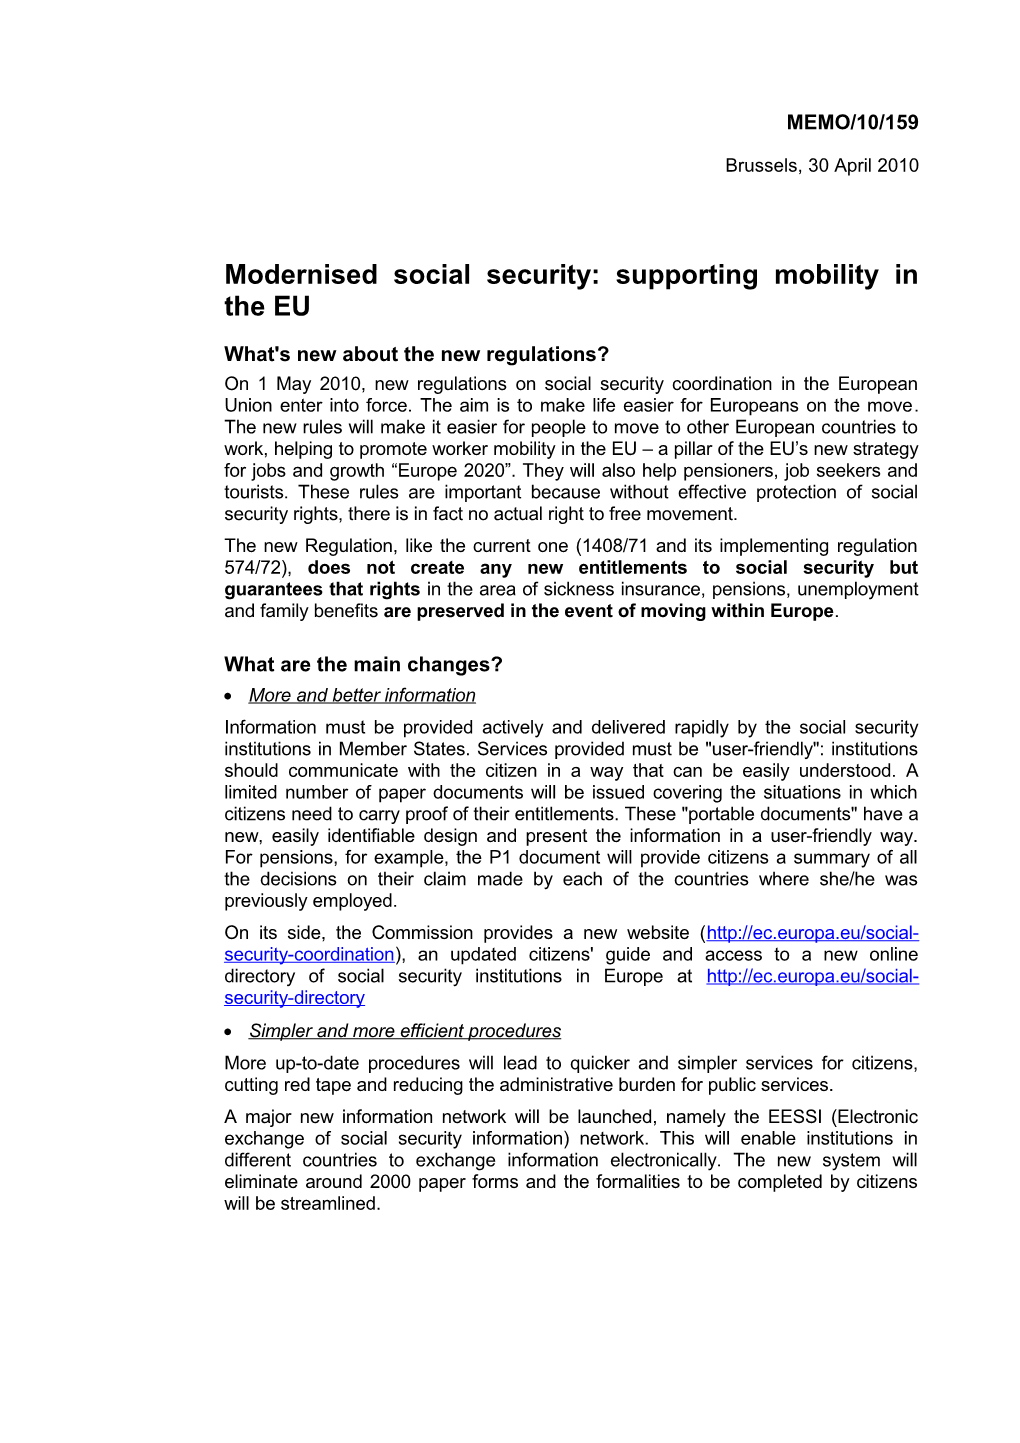 Modernised Social Security:Supporting Mobility in the EU